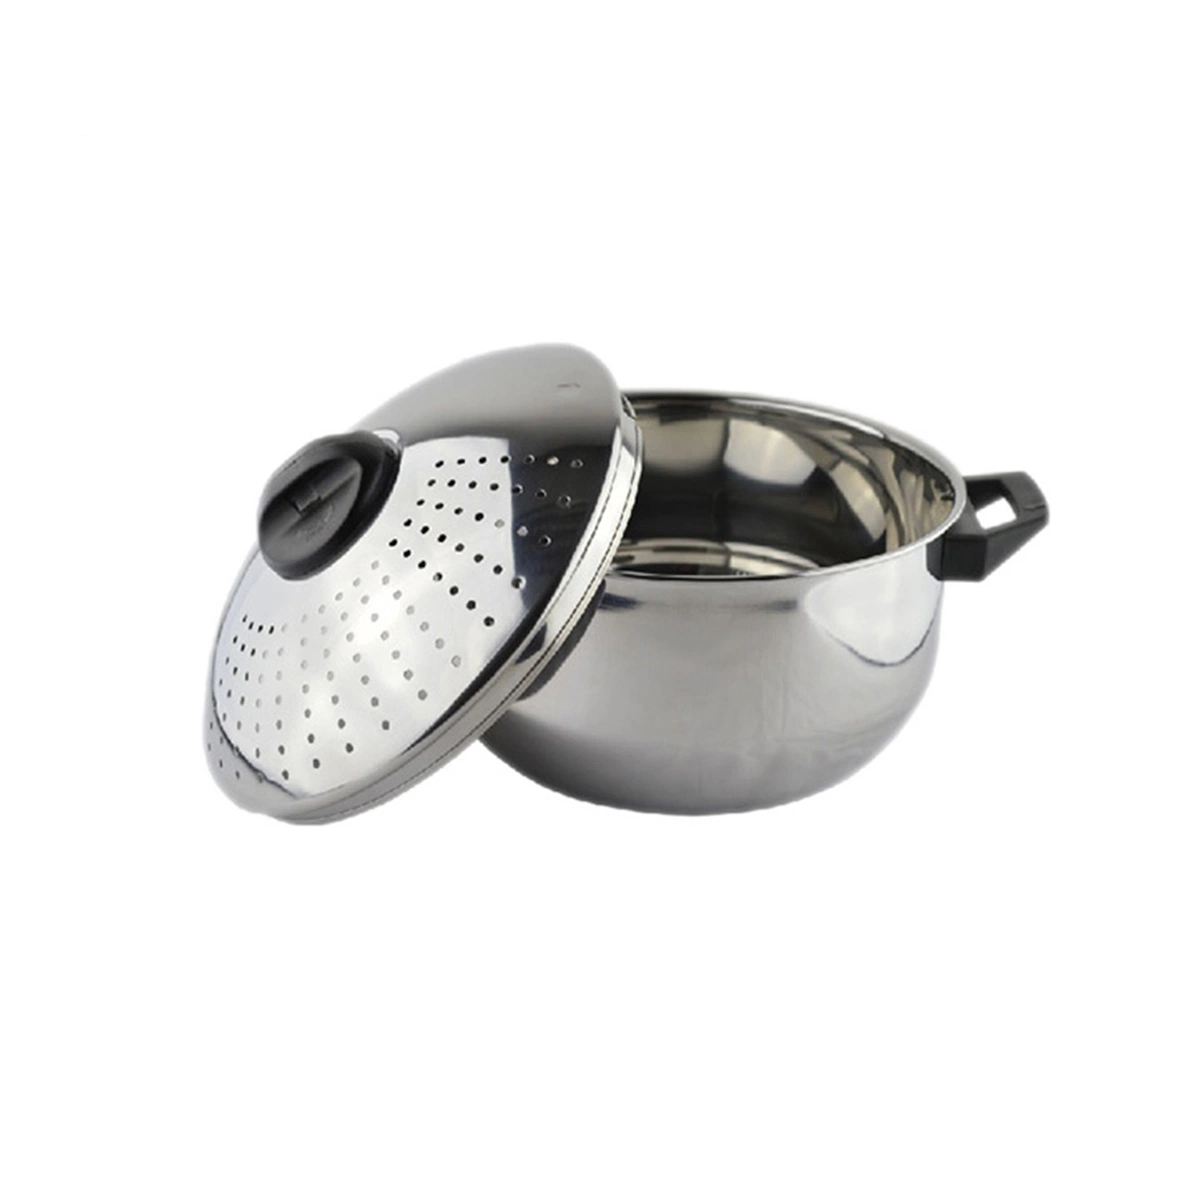 Stainless Steel Pasta Pot with Strainer Lid Noodle Pot